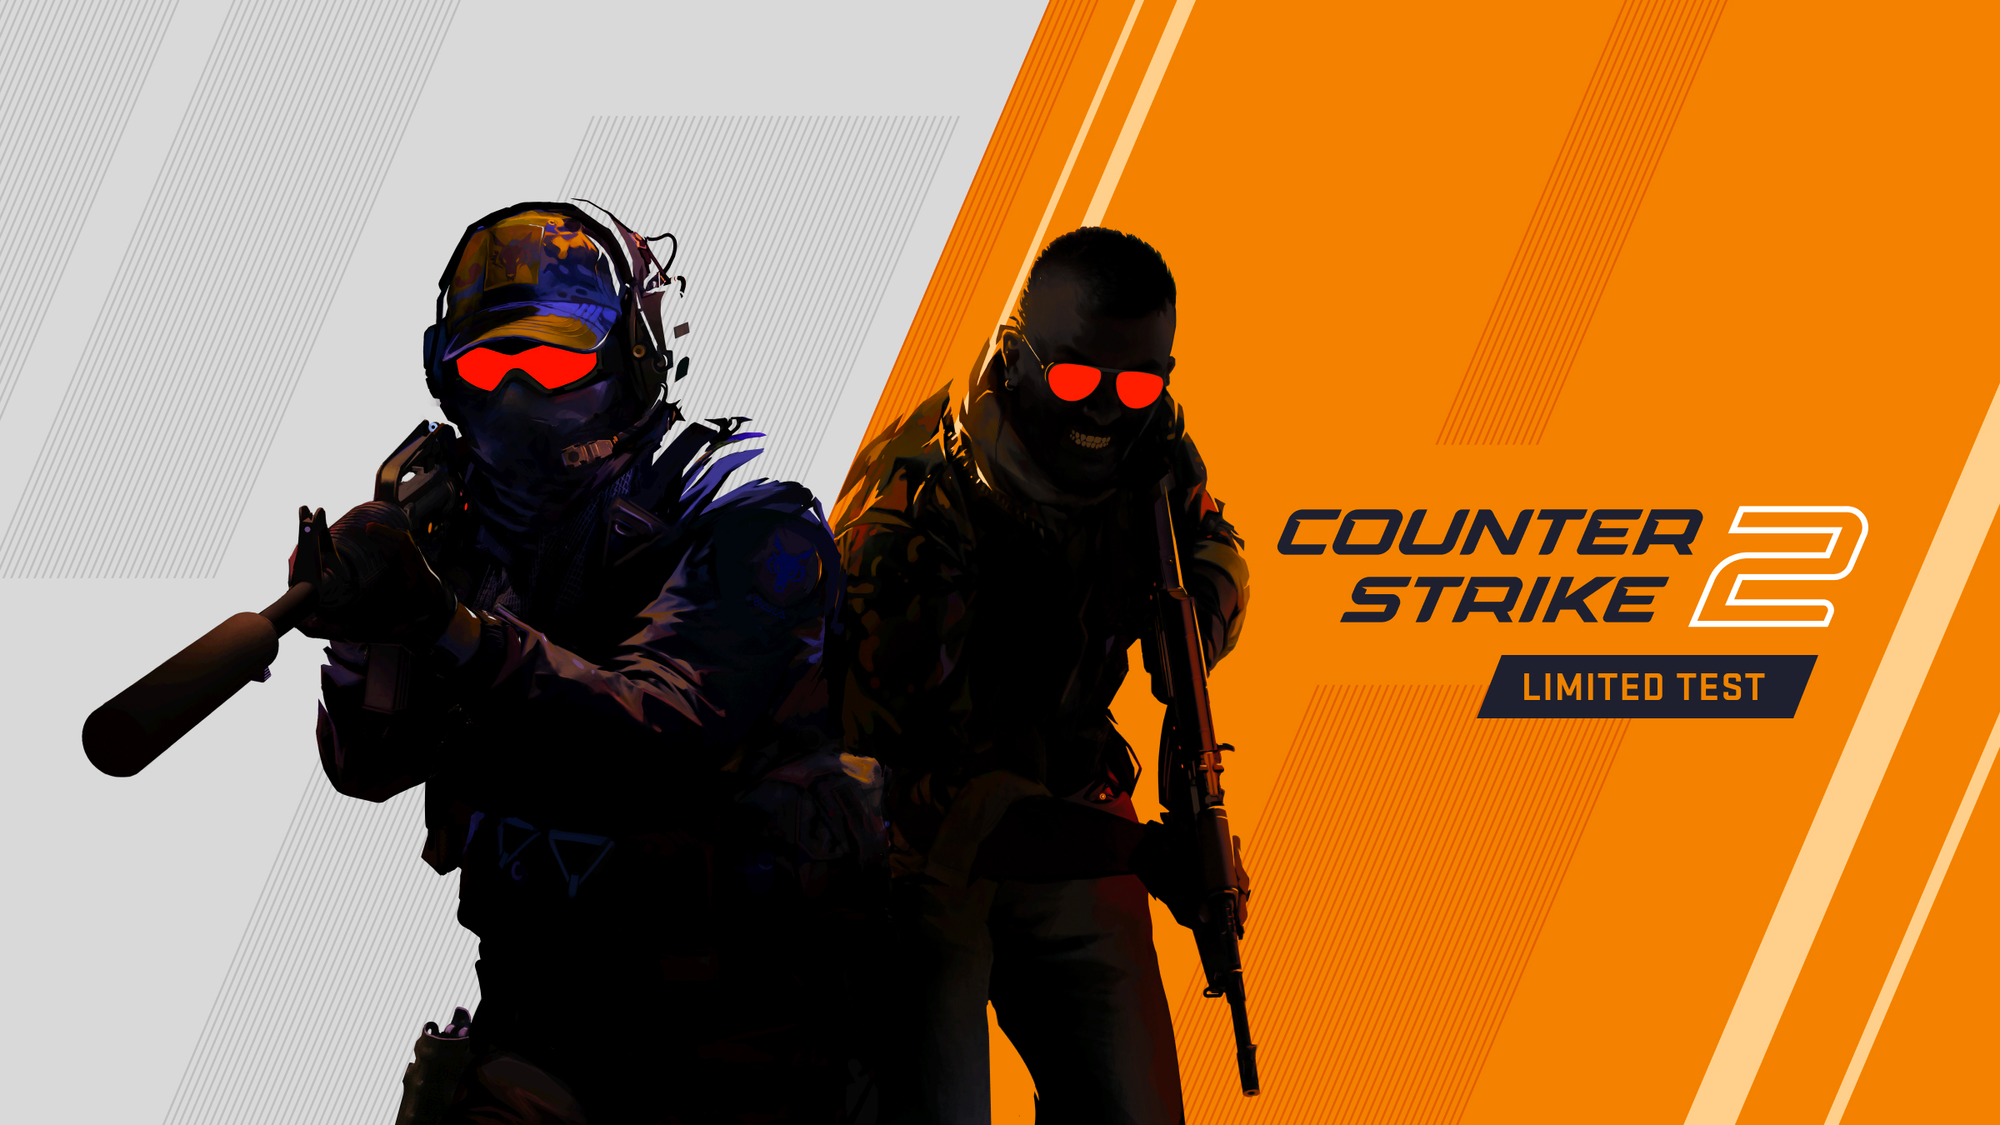 Counter-Strike 2 launches this summer